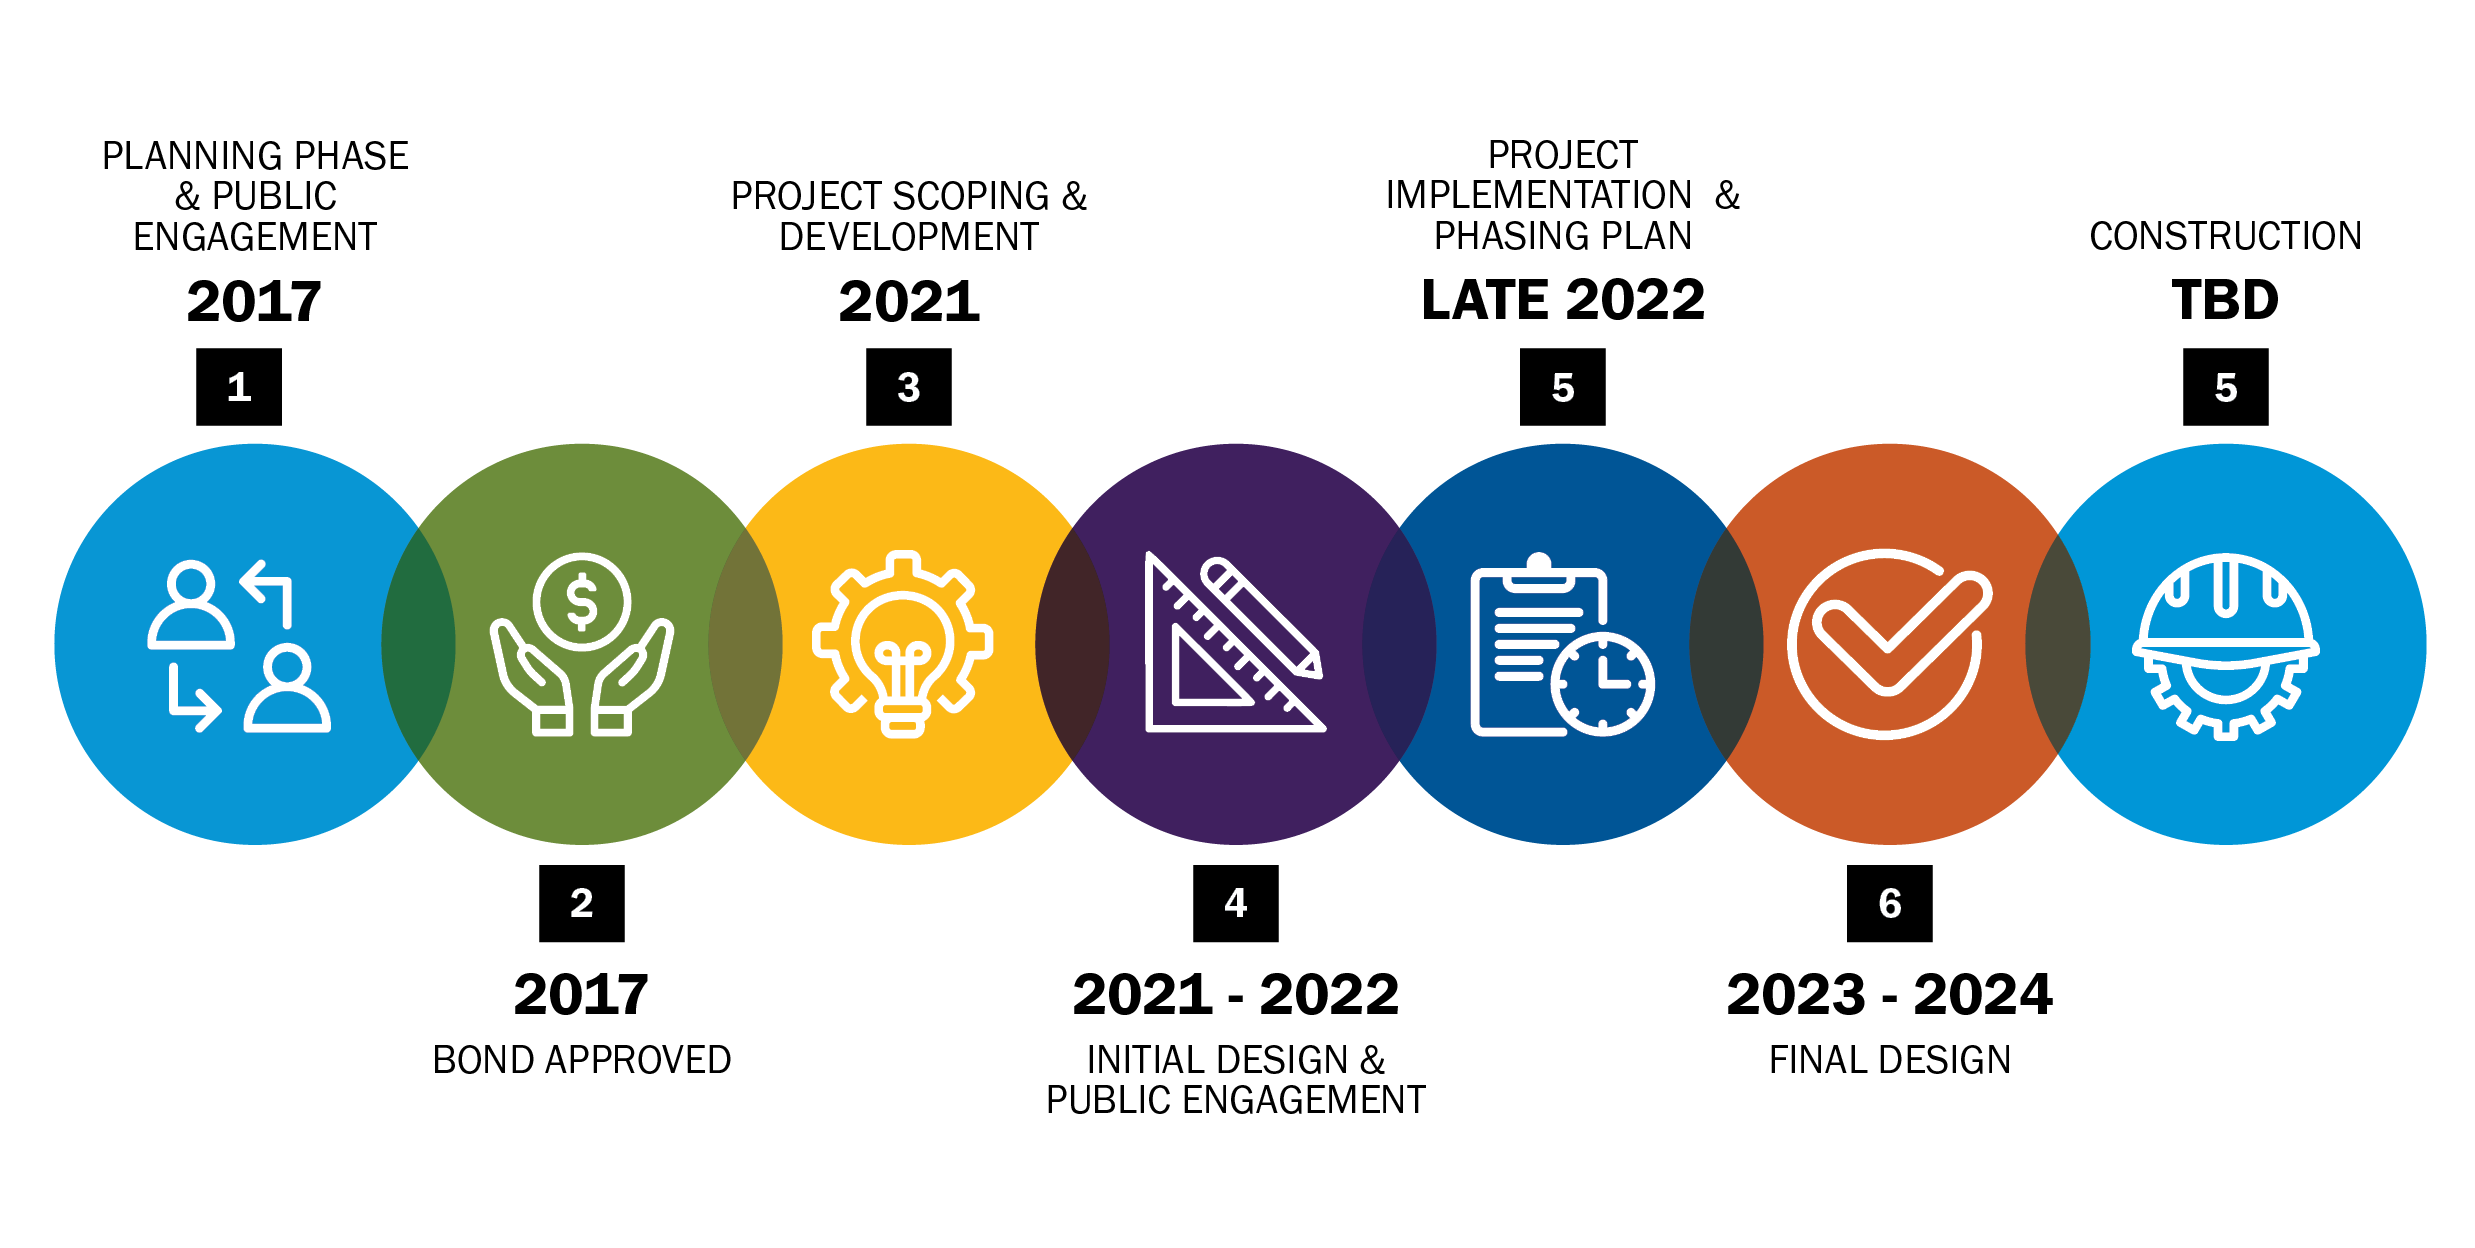 Timeline graphic from left to right starts with 2017 Planning Phase and Public Engagement, then it shows 2017 Bond approved, then fast forward to 2021 we’re in project scoping and development, between 2021 and 2022 is the design phase and public engagement, then comes late 2022 project implementation plan. Lastly, Construction is to be determined.